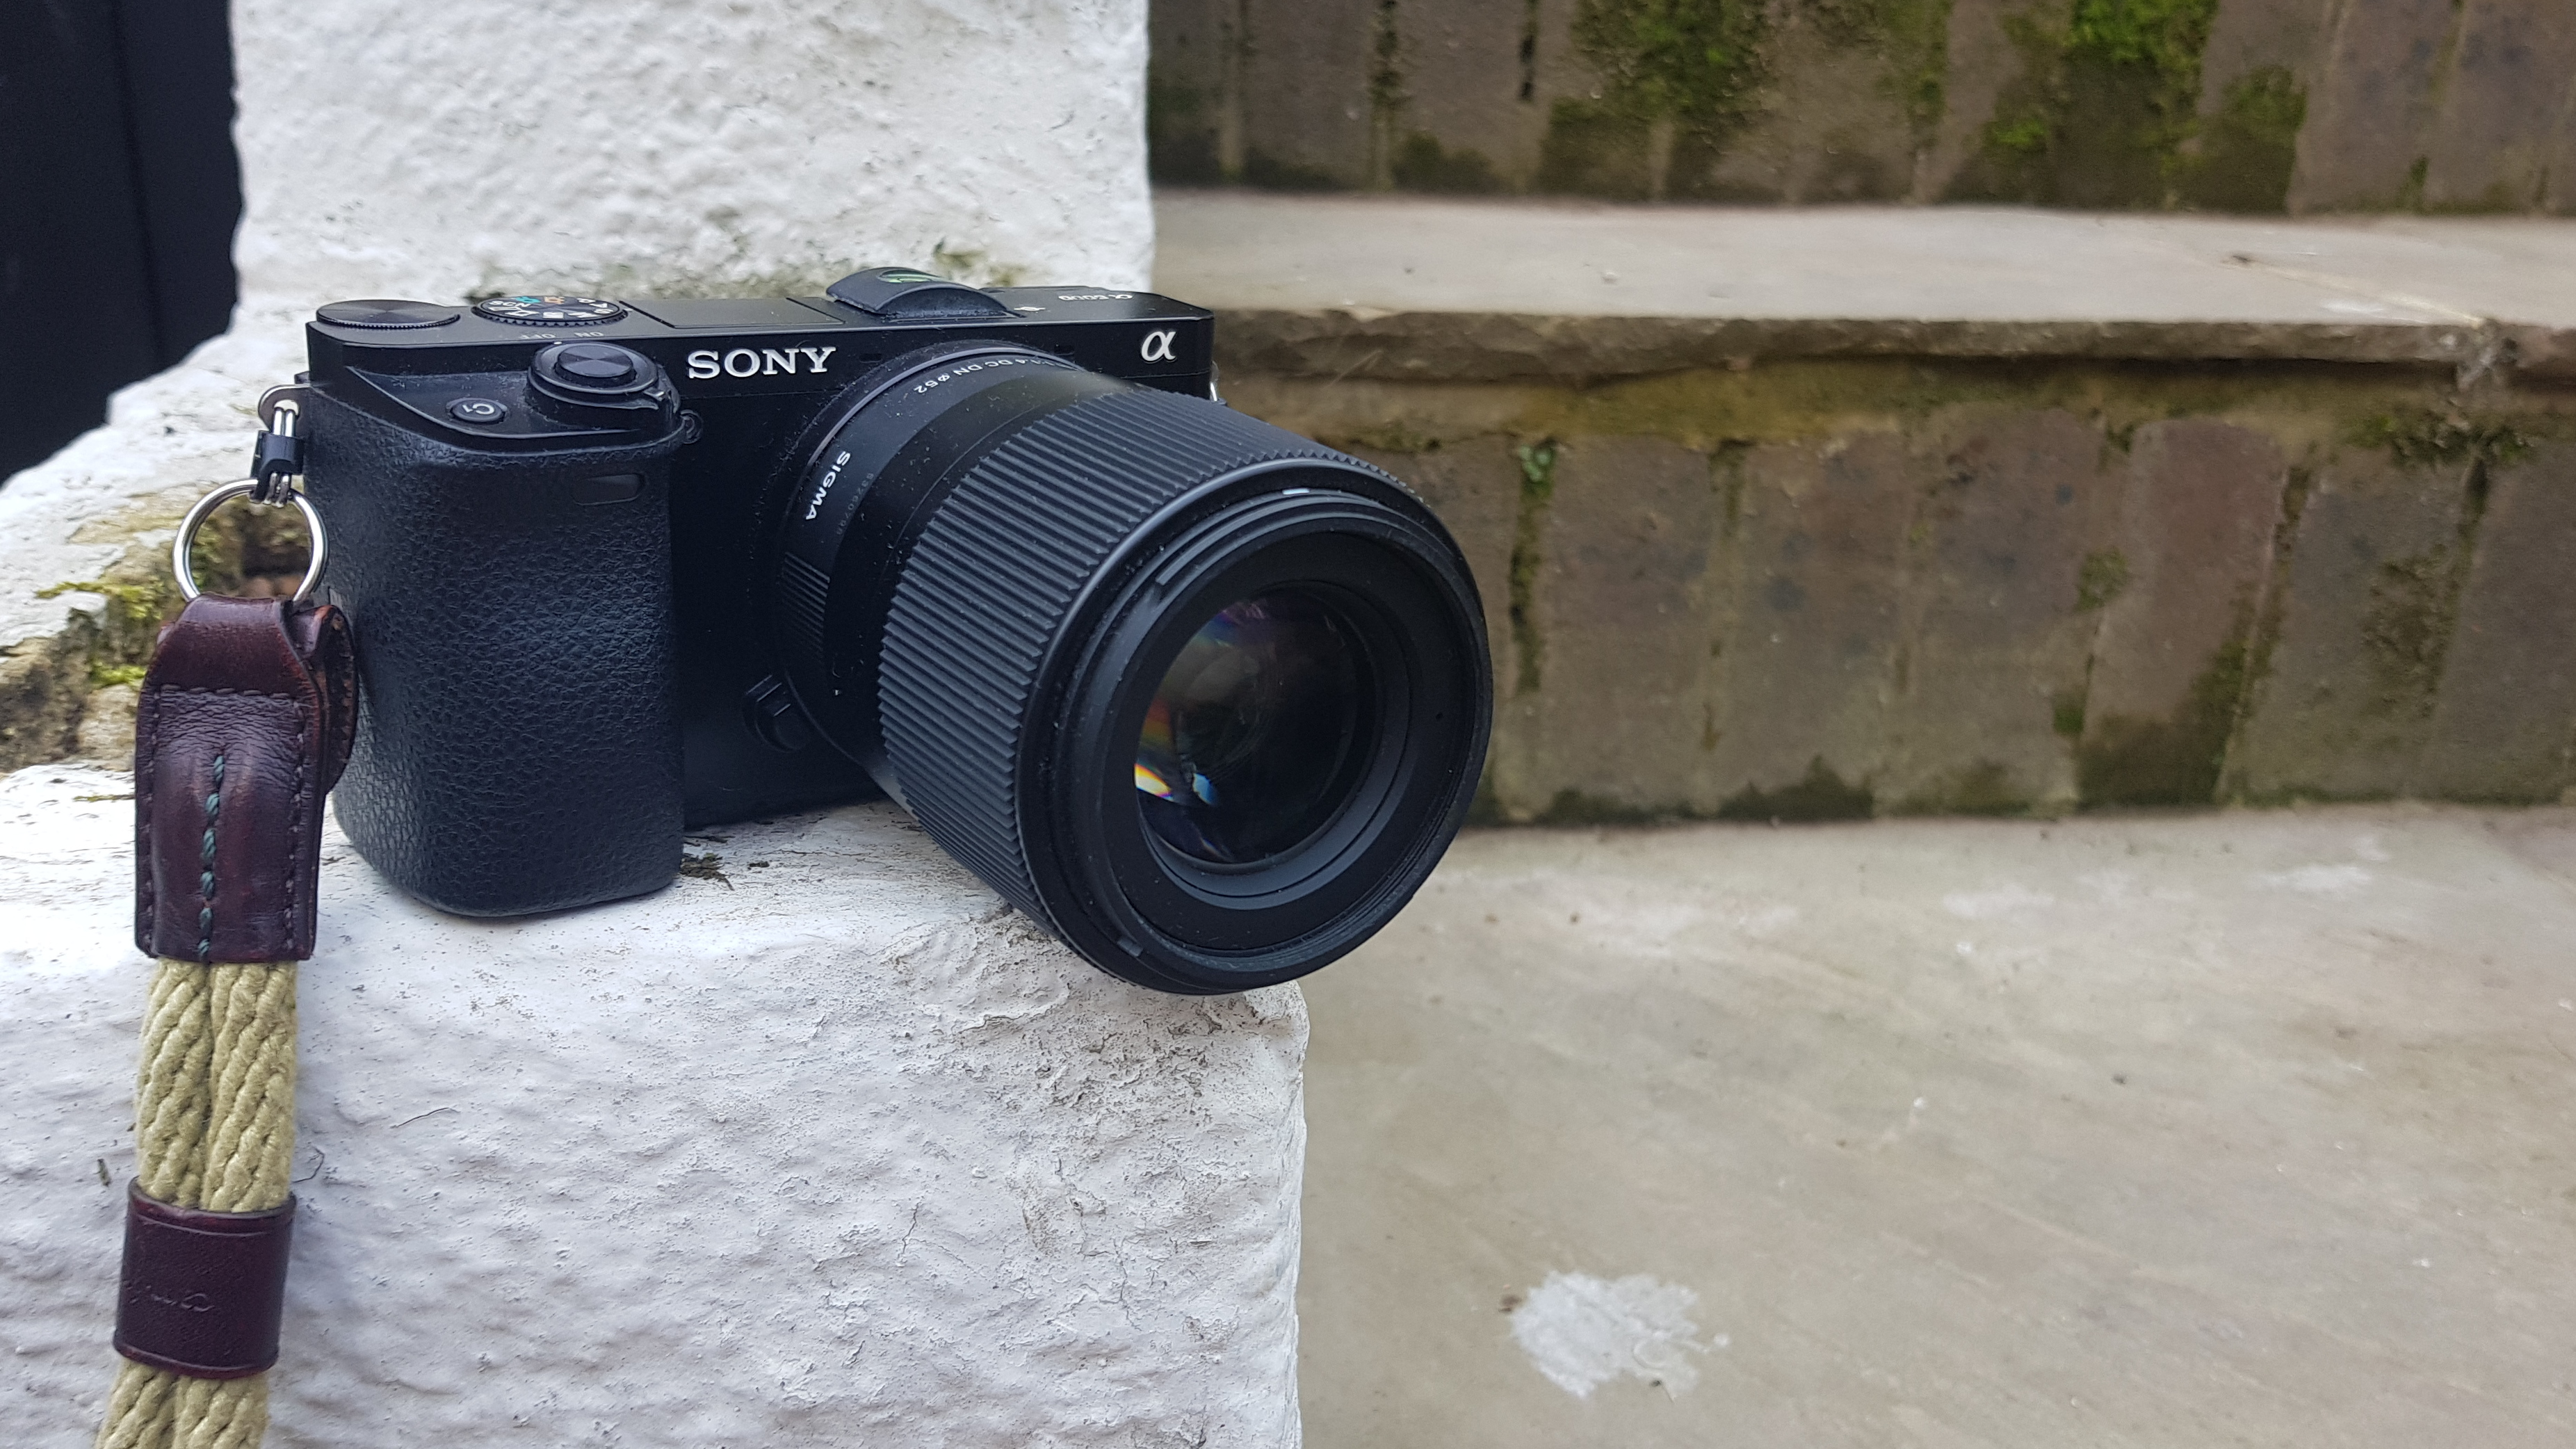 Photograph of Sony A6000 camera on stone wall with 30mm lens and wrist strap